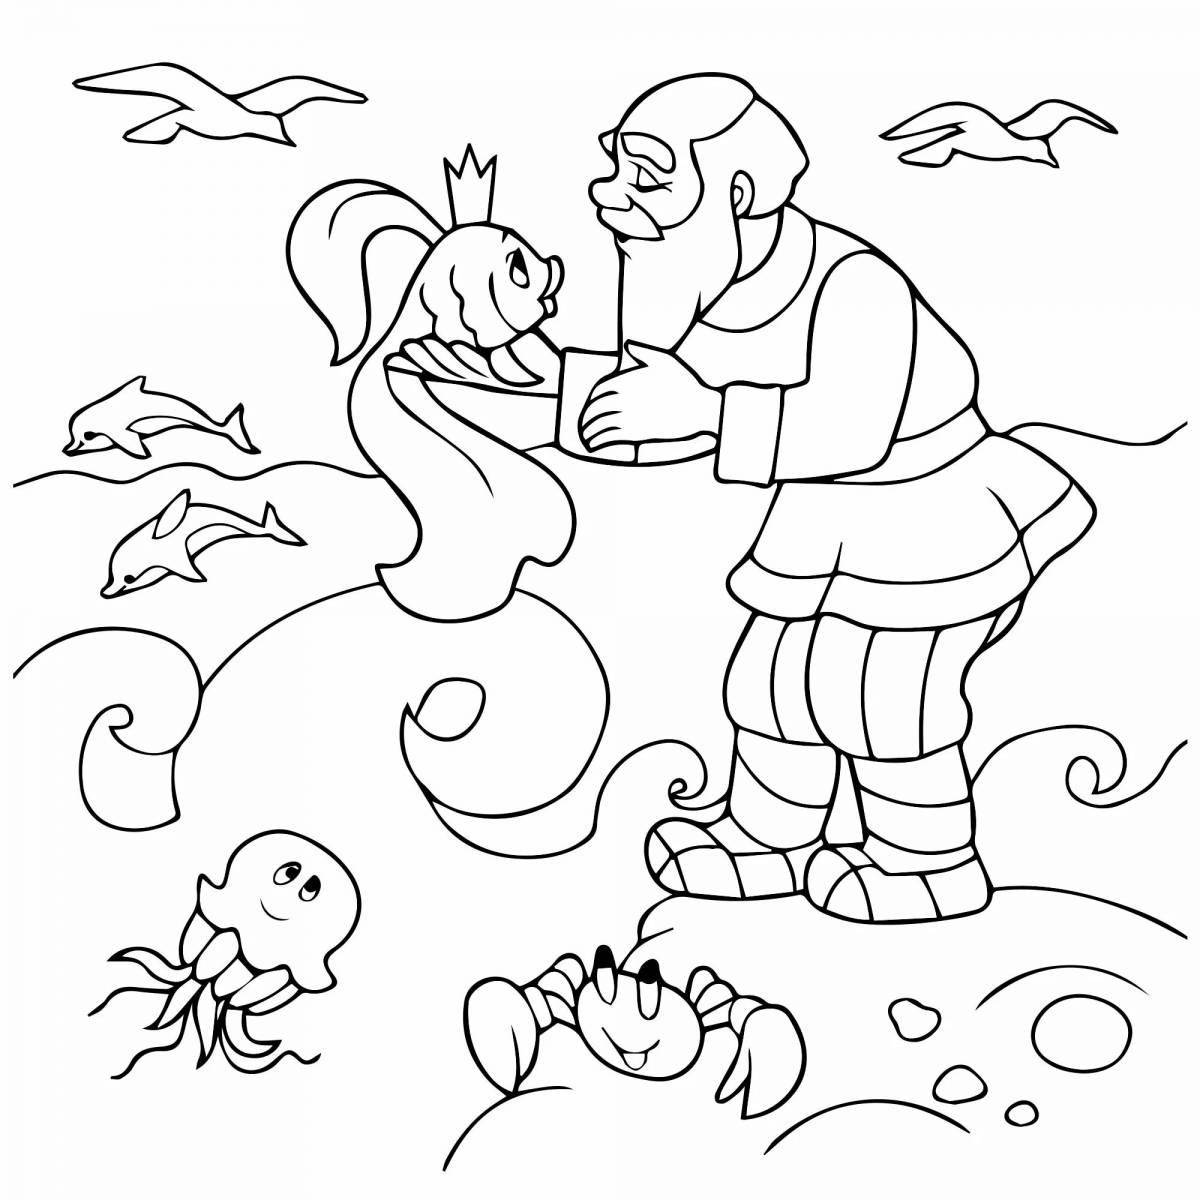 A beautiful coloring book for the tale of the fisherman and the fish